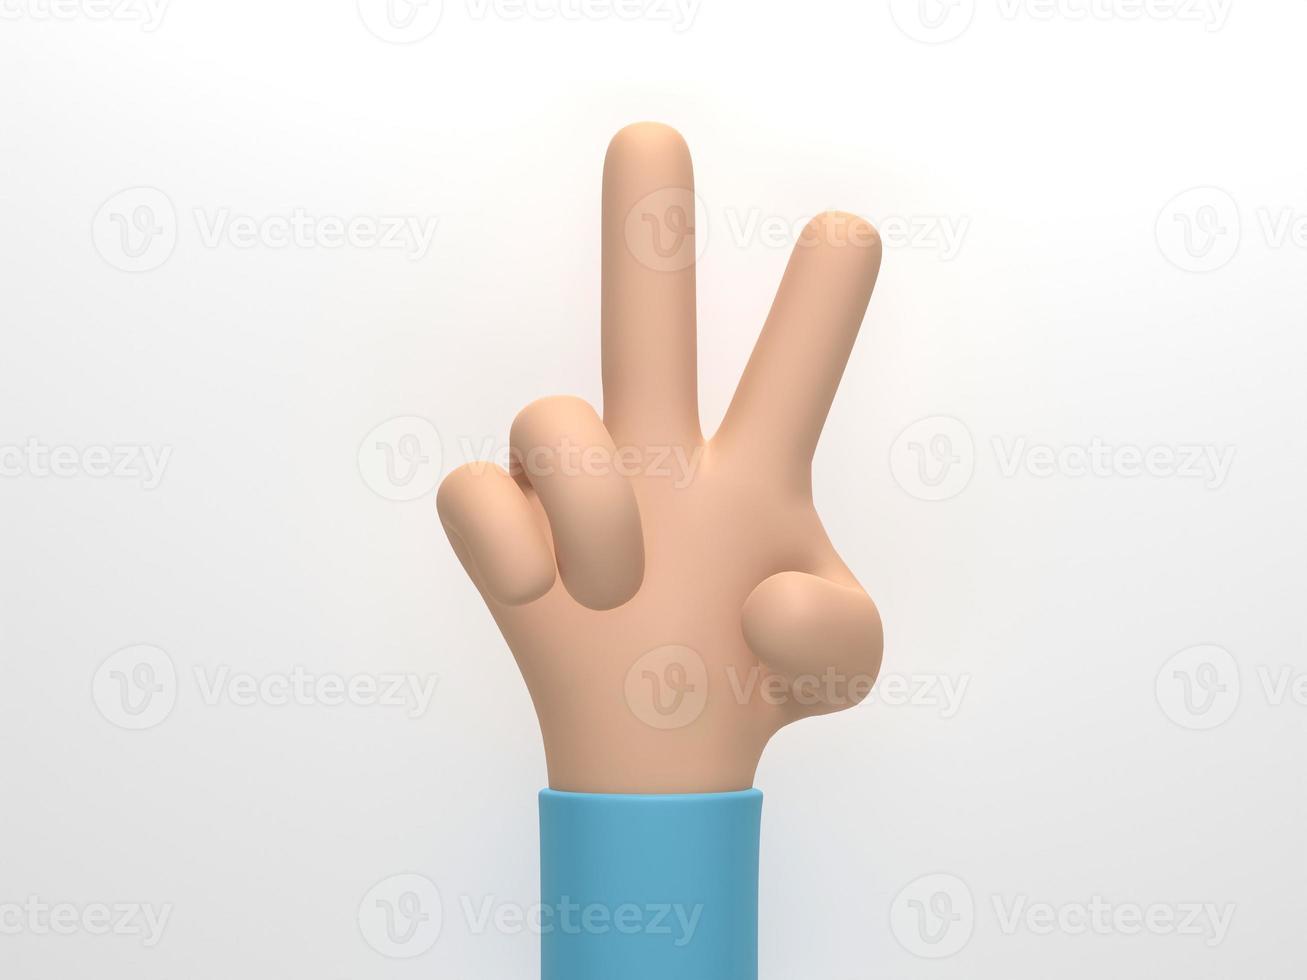 3D rendering, 3D illustration. Cartoon character hand isolated on white background. Simple hand style photo